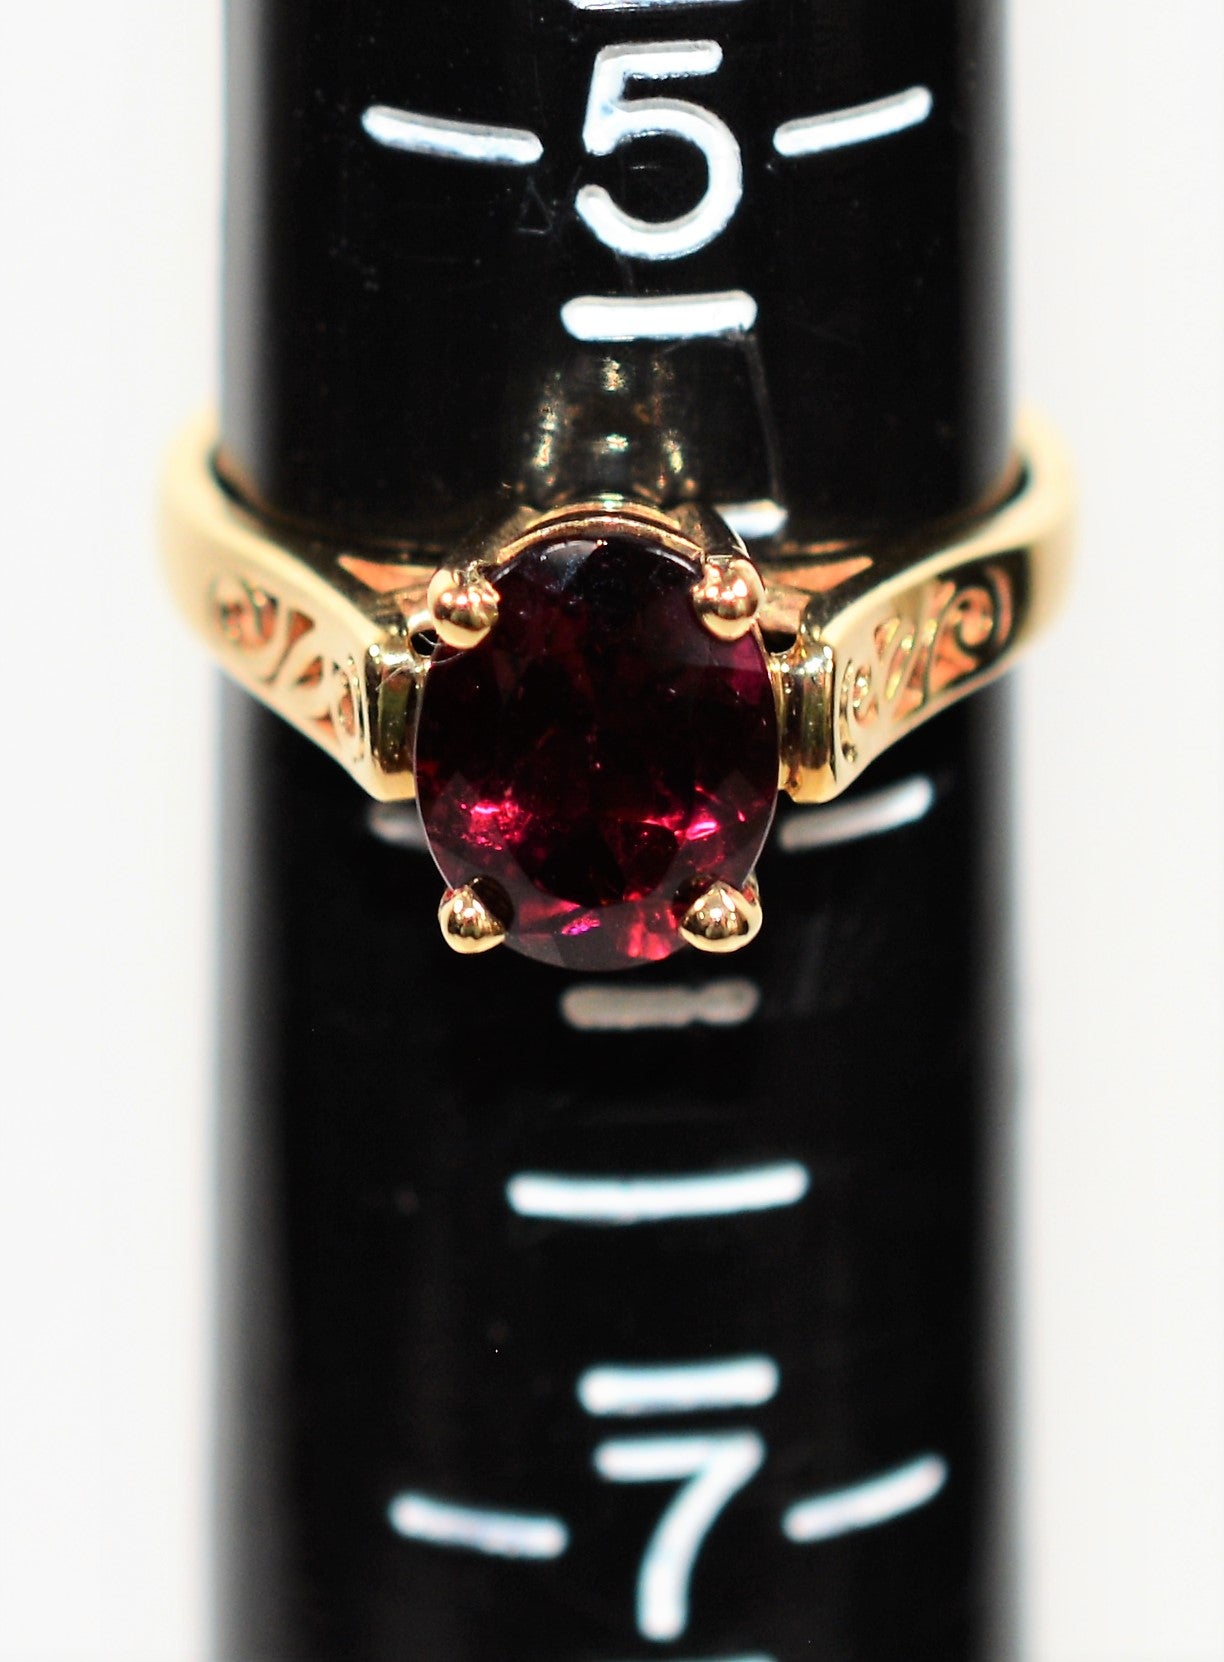 Natural Rubellite Ring 14K Solid Gold 1.90ct Pink Tourmaline Ring Solitaire Ring Vintage Ring Antique Ring Women's Ring Fine Estate Jewelry